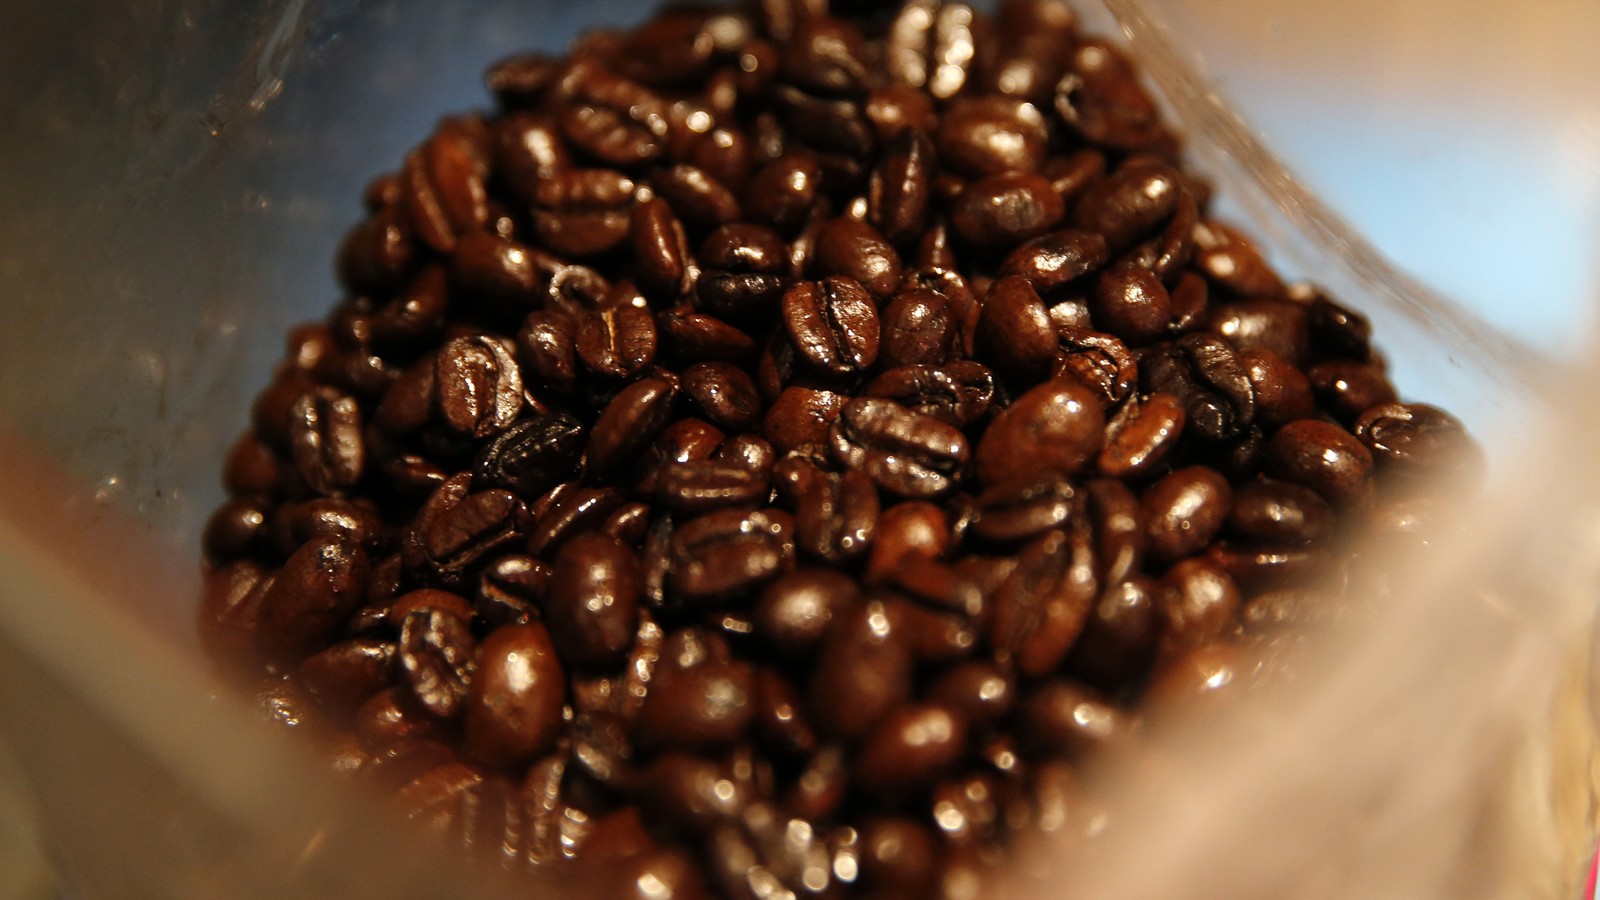 How Many Coffee Beans Is Equivalent to a Cup of Coffee? – Writers